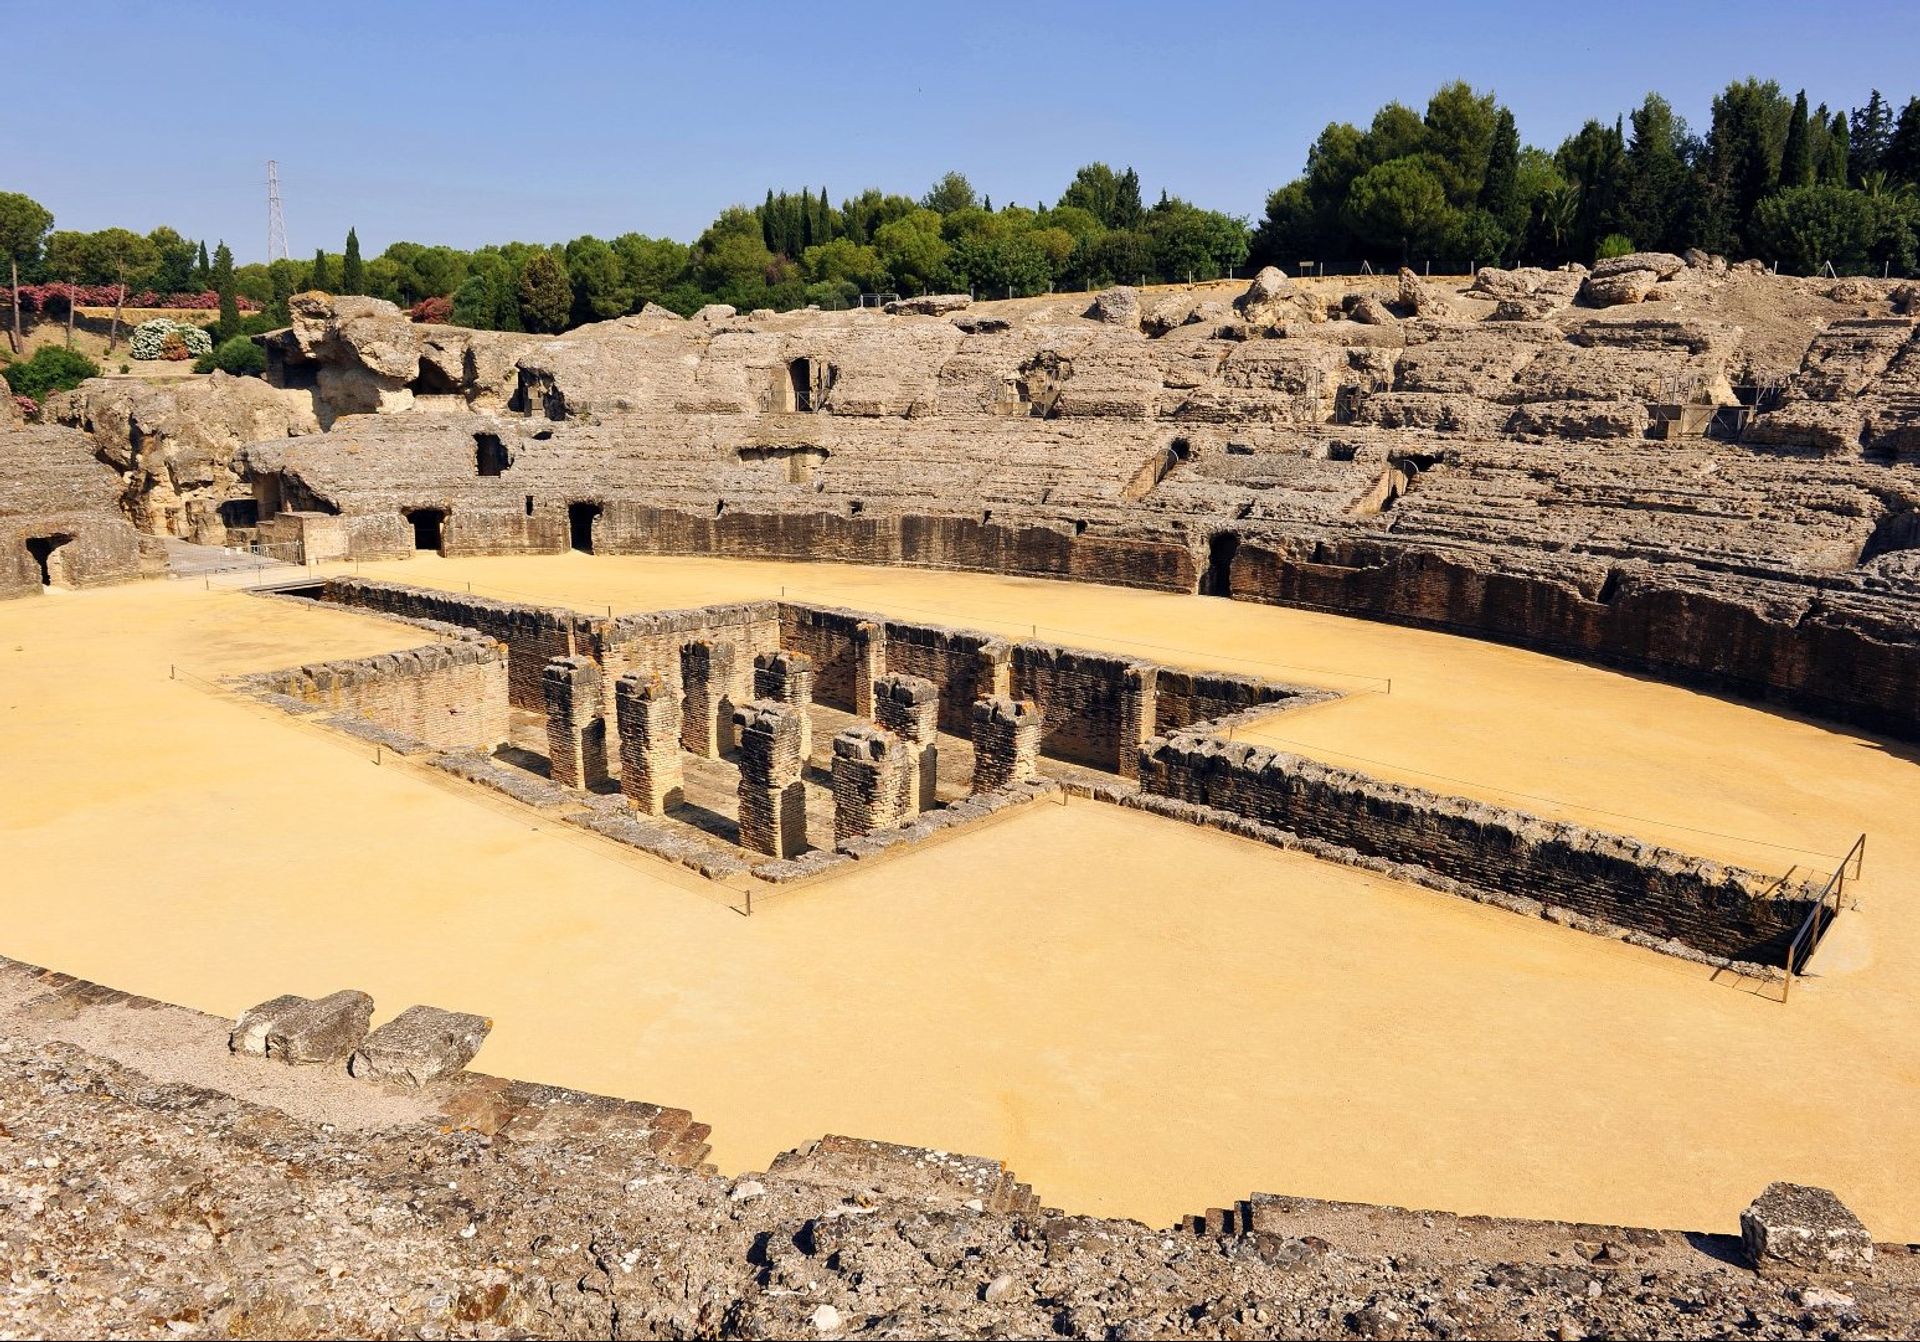 The rich history of Andalucia draws more tourists every year. Revel in the ancient Roman remains of Italica